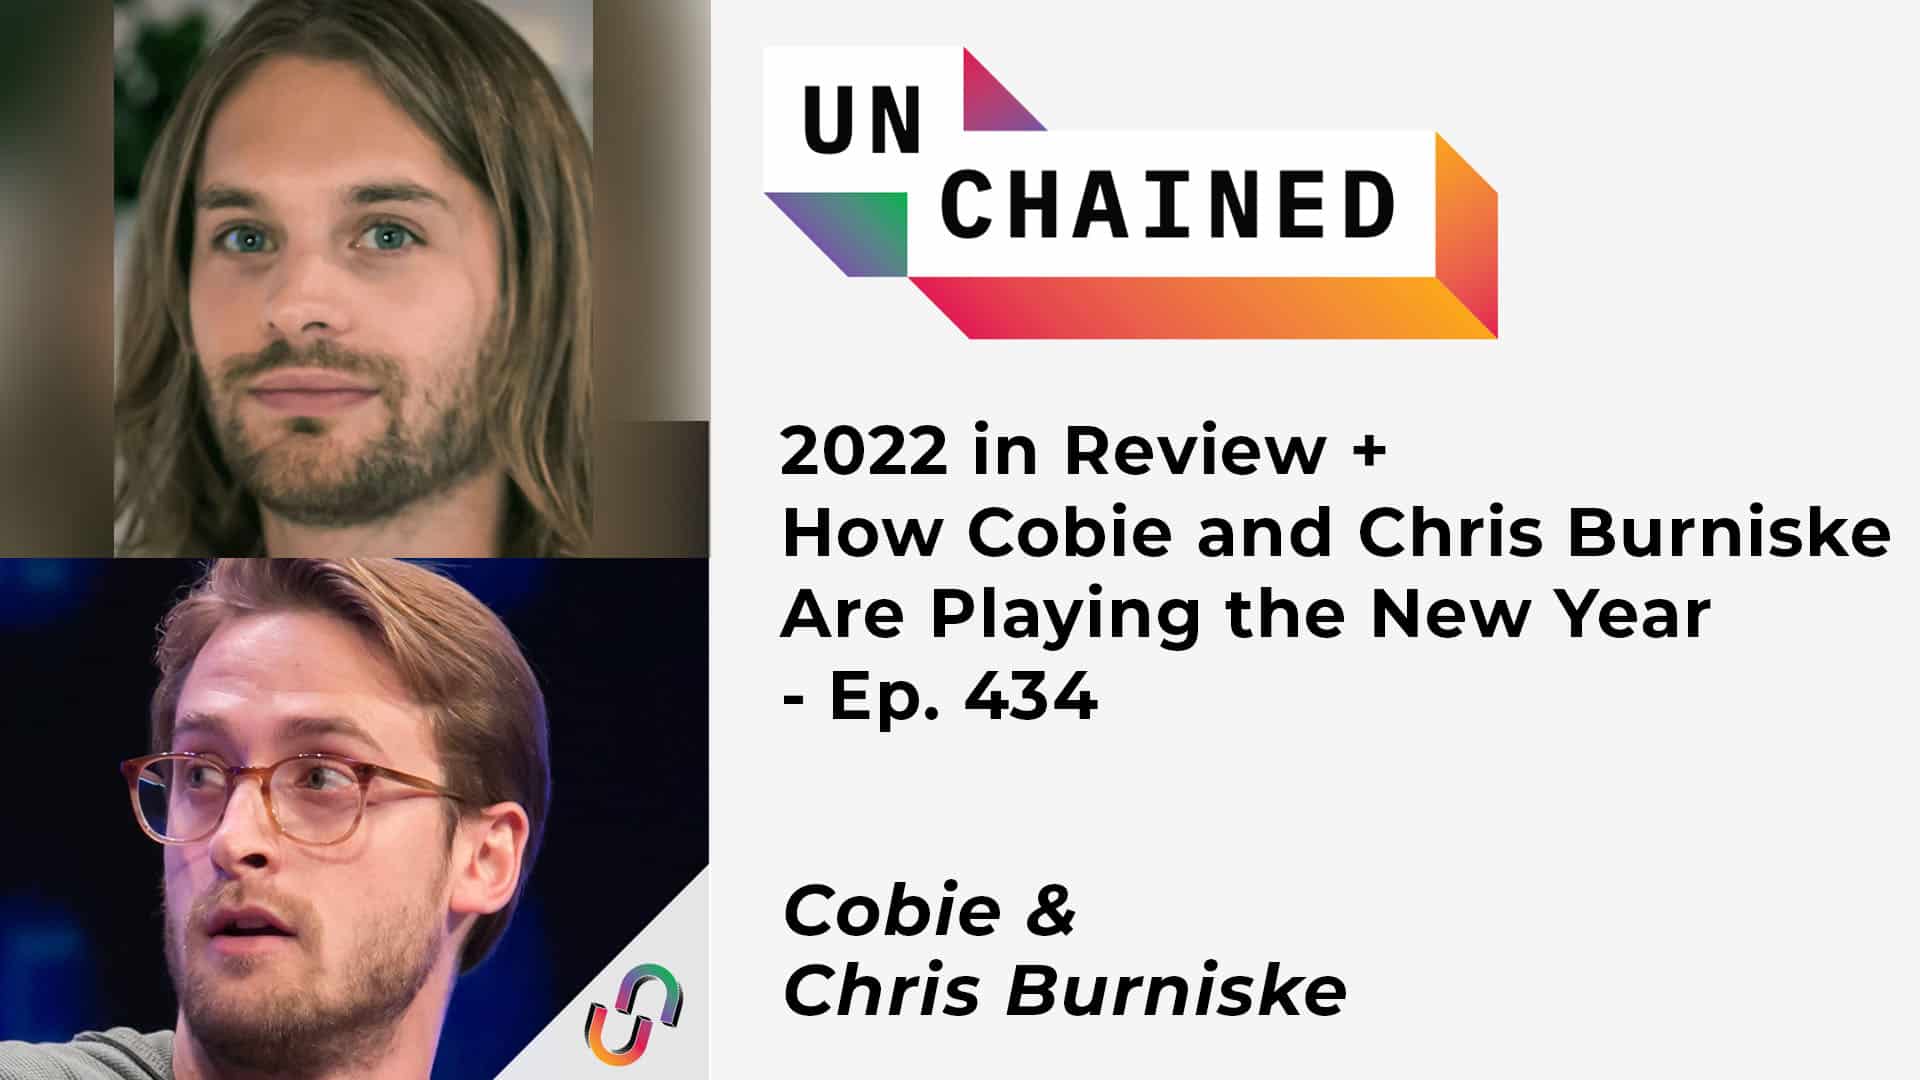 2022 in Review + How Cobie and Chris Burniske Are Playing the New Year - Ep. 434